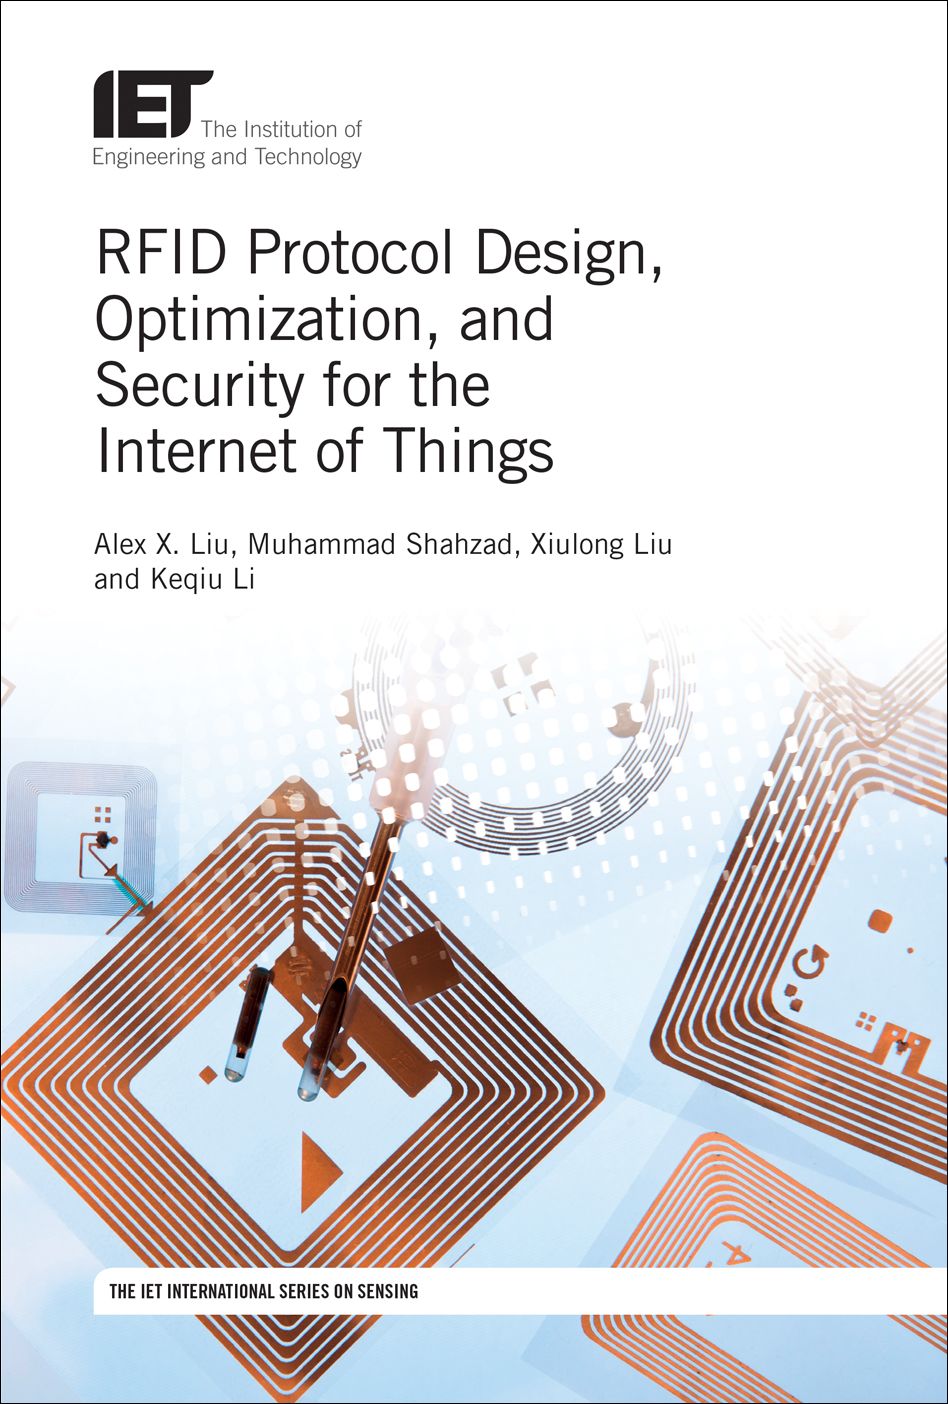 RFID Protocol Design, Optimization, and Security for the Internet of Things